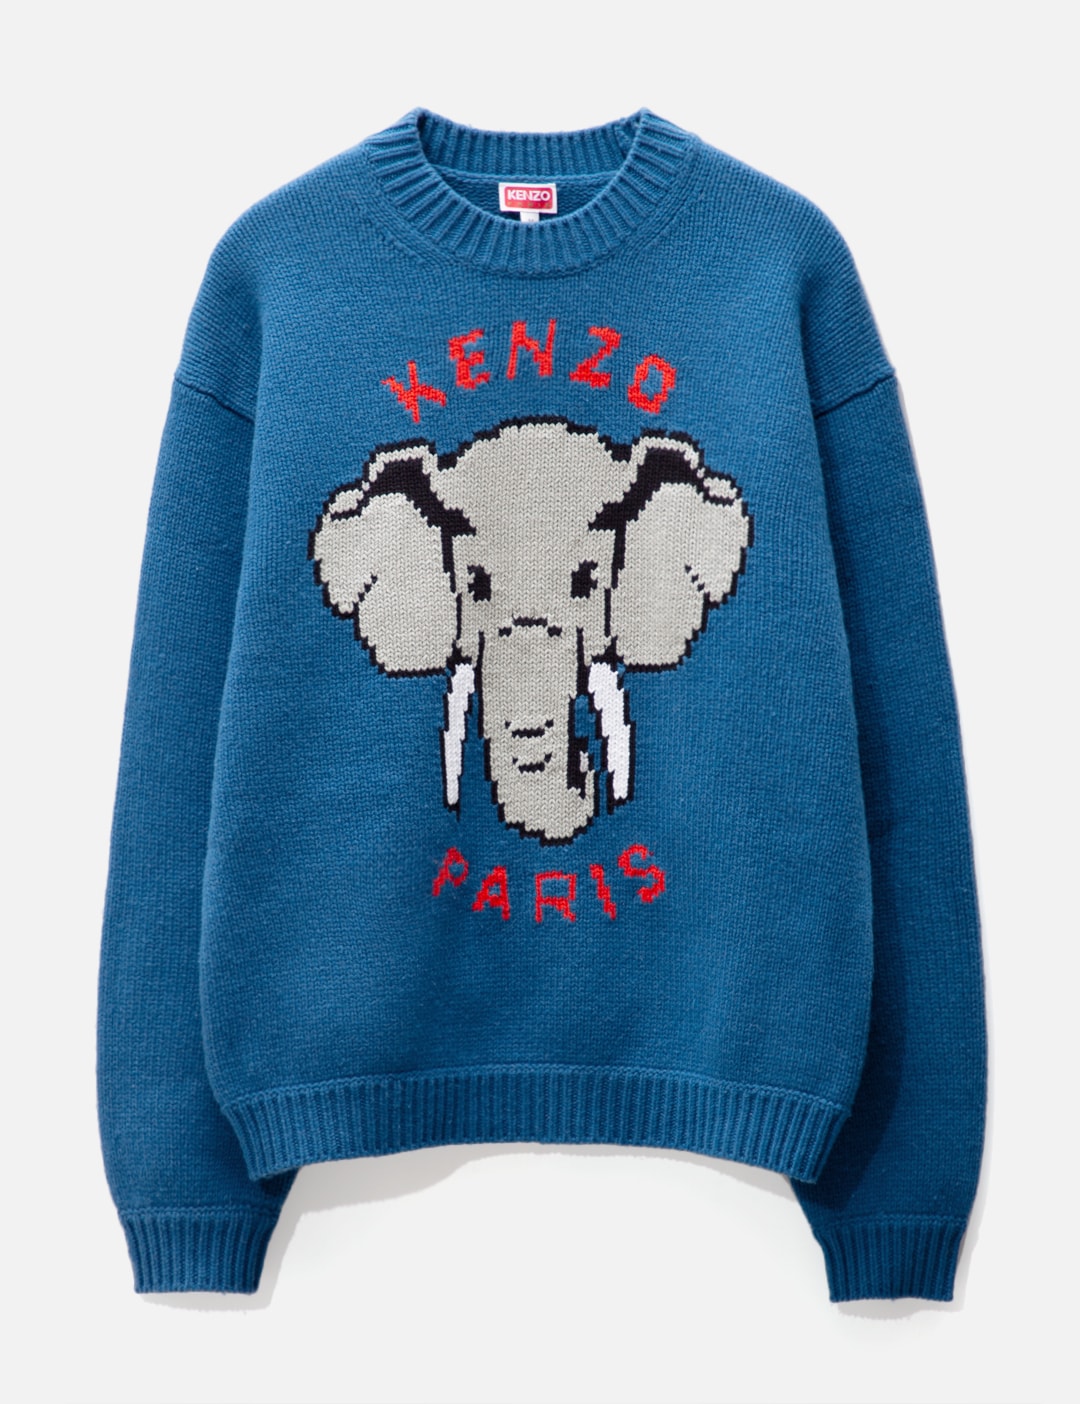 Hilarisch Becks Hechting Kenzo - 'Kenzo Elephant' Wool Sweater | HBX - Globally Curated Fashion and  Lifestyle by Hypebeast